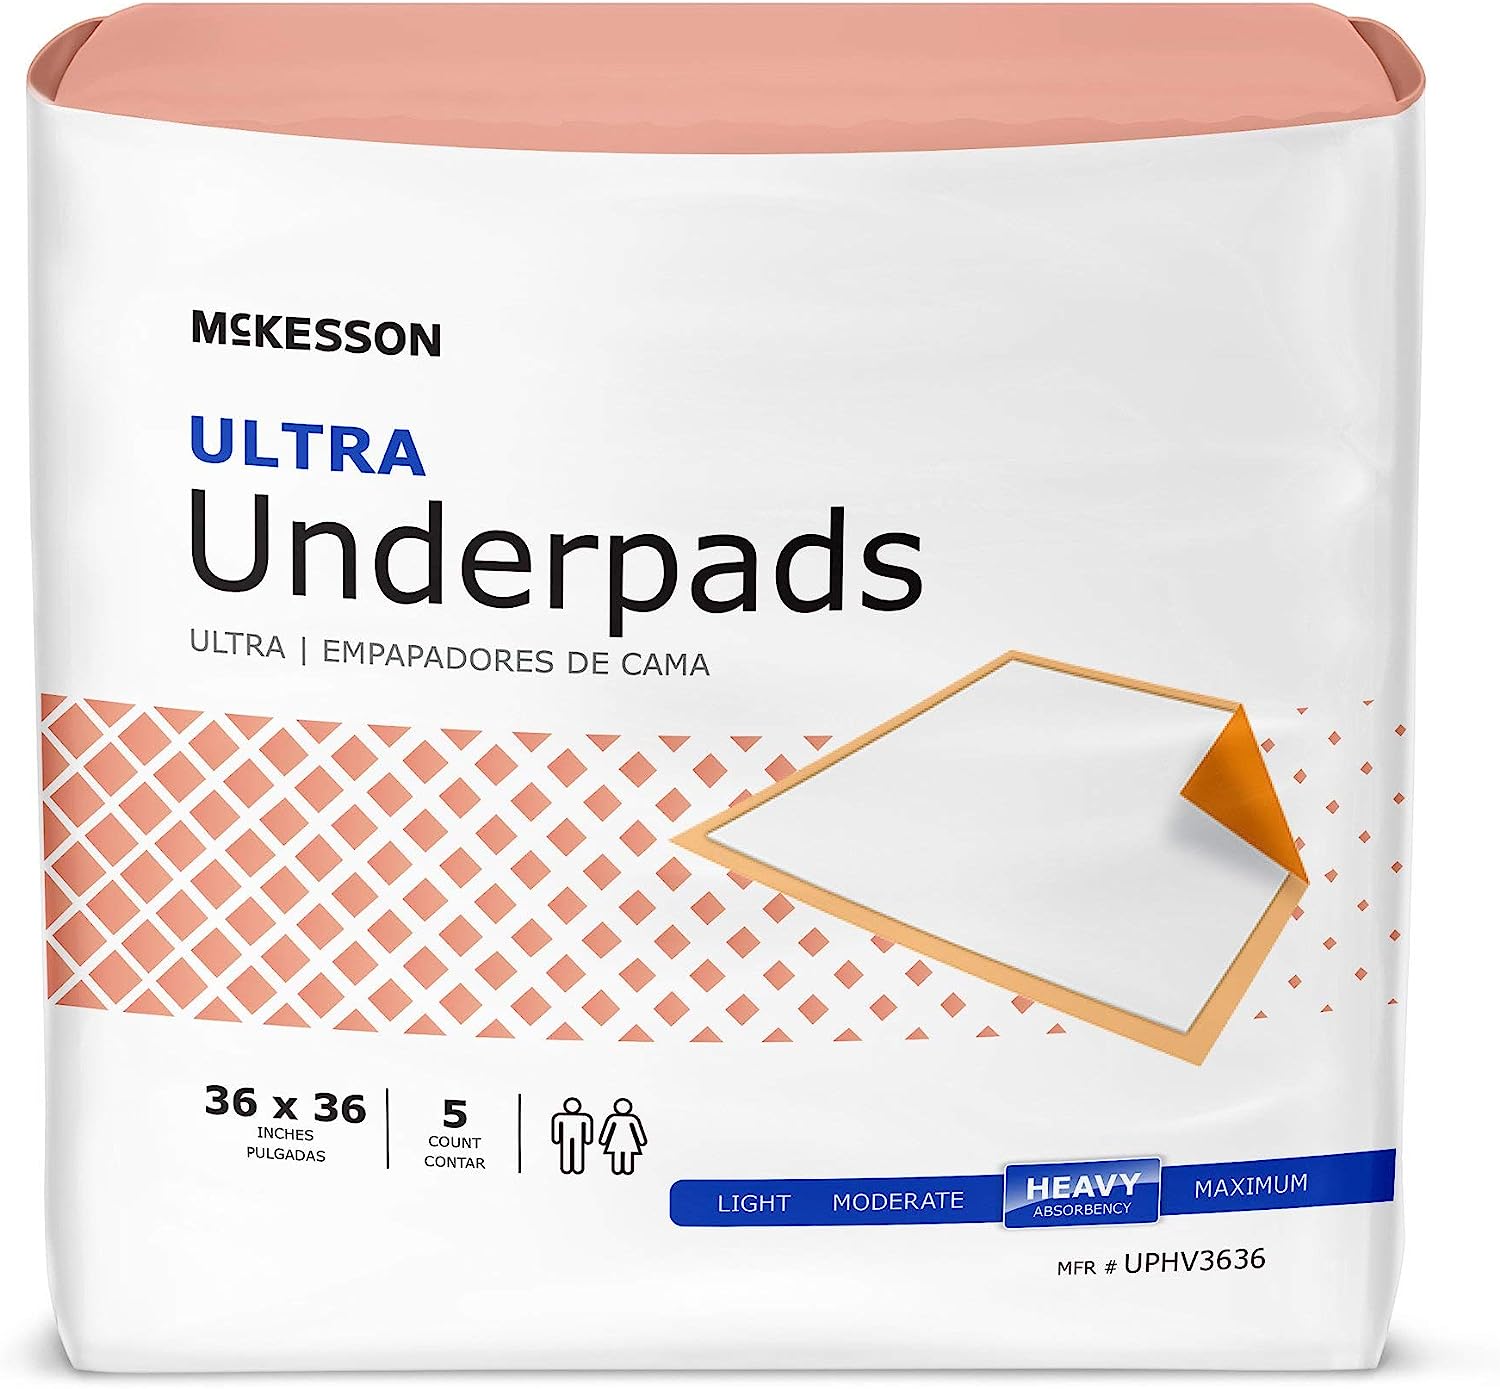 McKesson Ultra Underpads, Adult Incontinence Bed Pads, Chux, Disposable, Heavy Absorbency, 36 in x 36 in, 50 Count